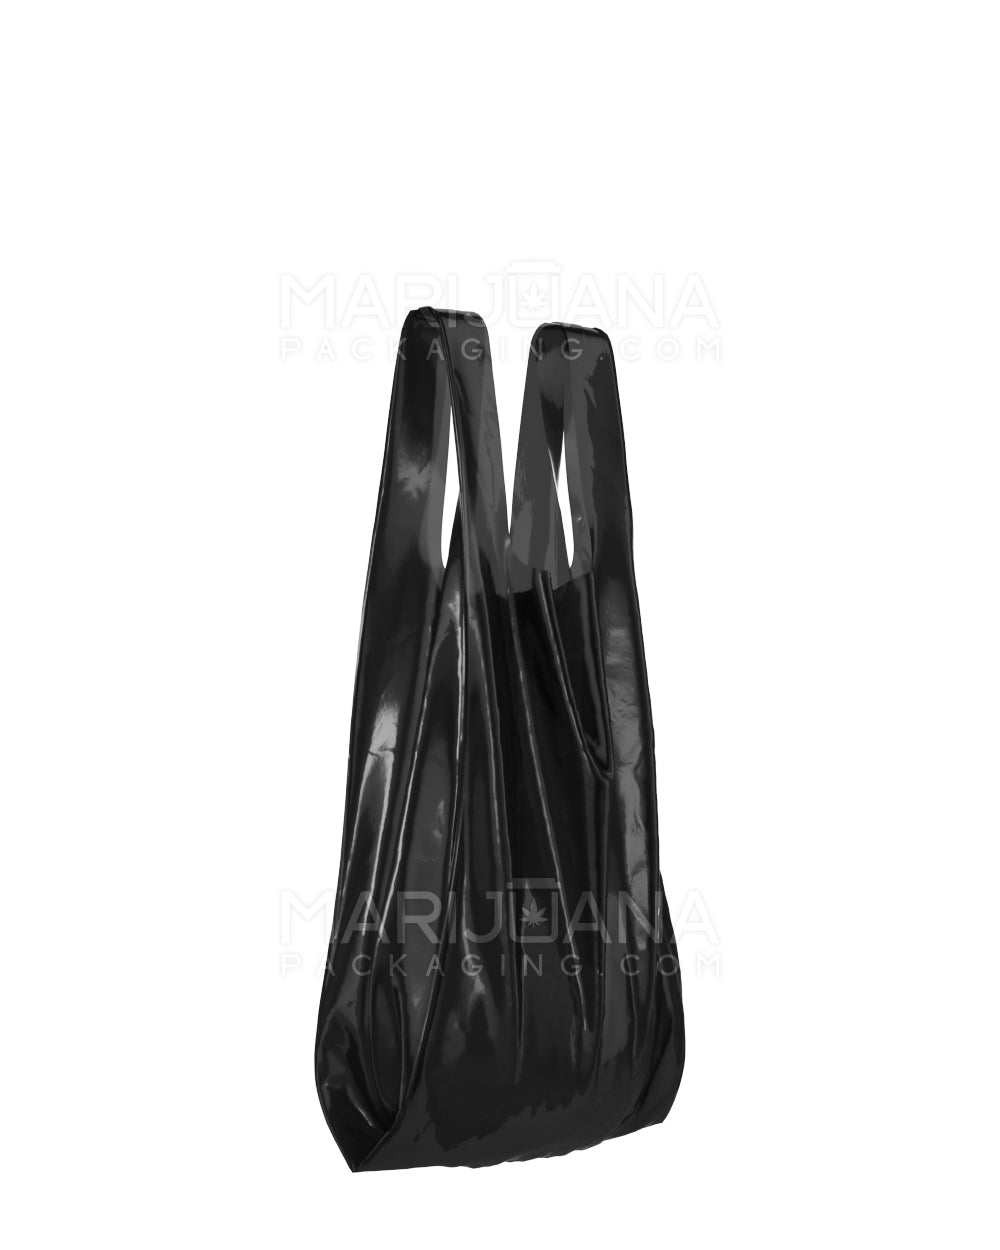 Small Plastic Bag | 8in x 16in - Black - 1000 Count - 2